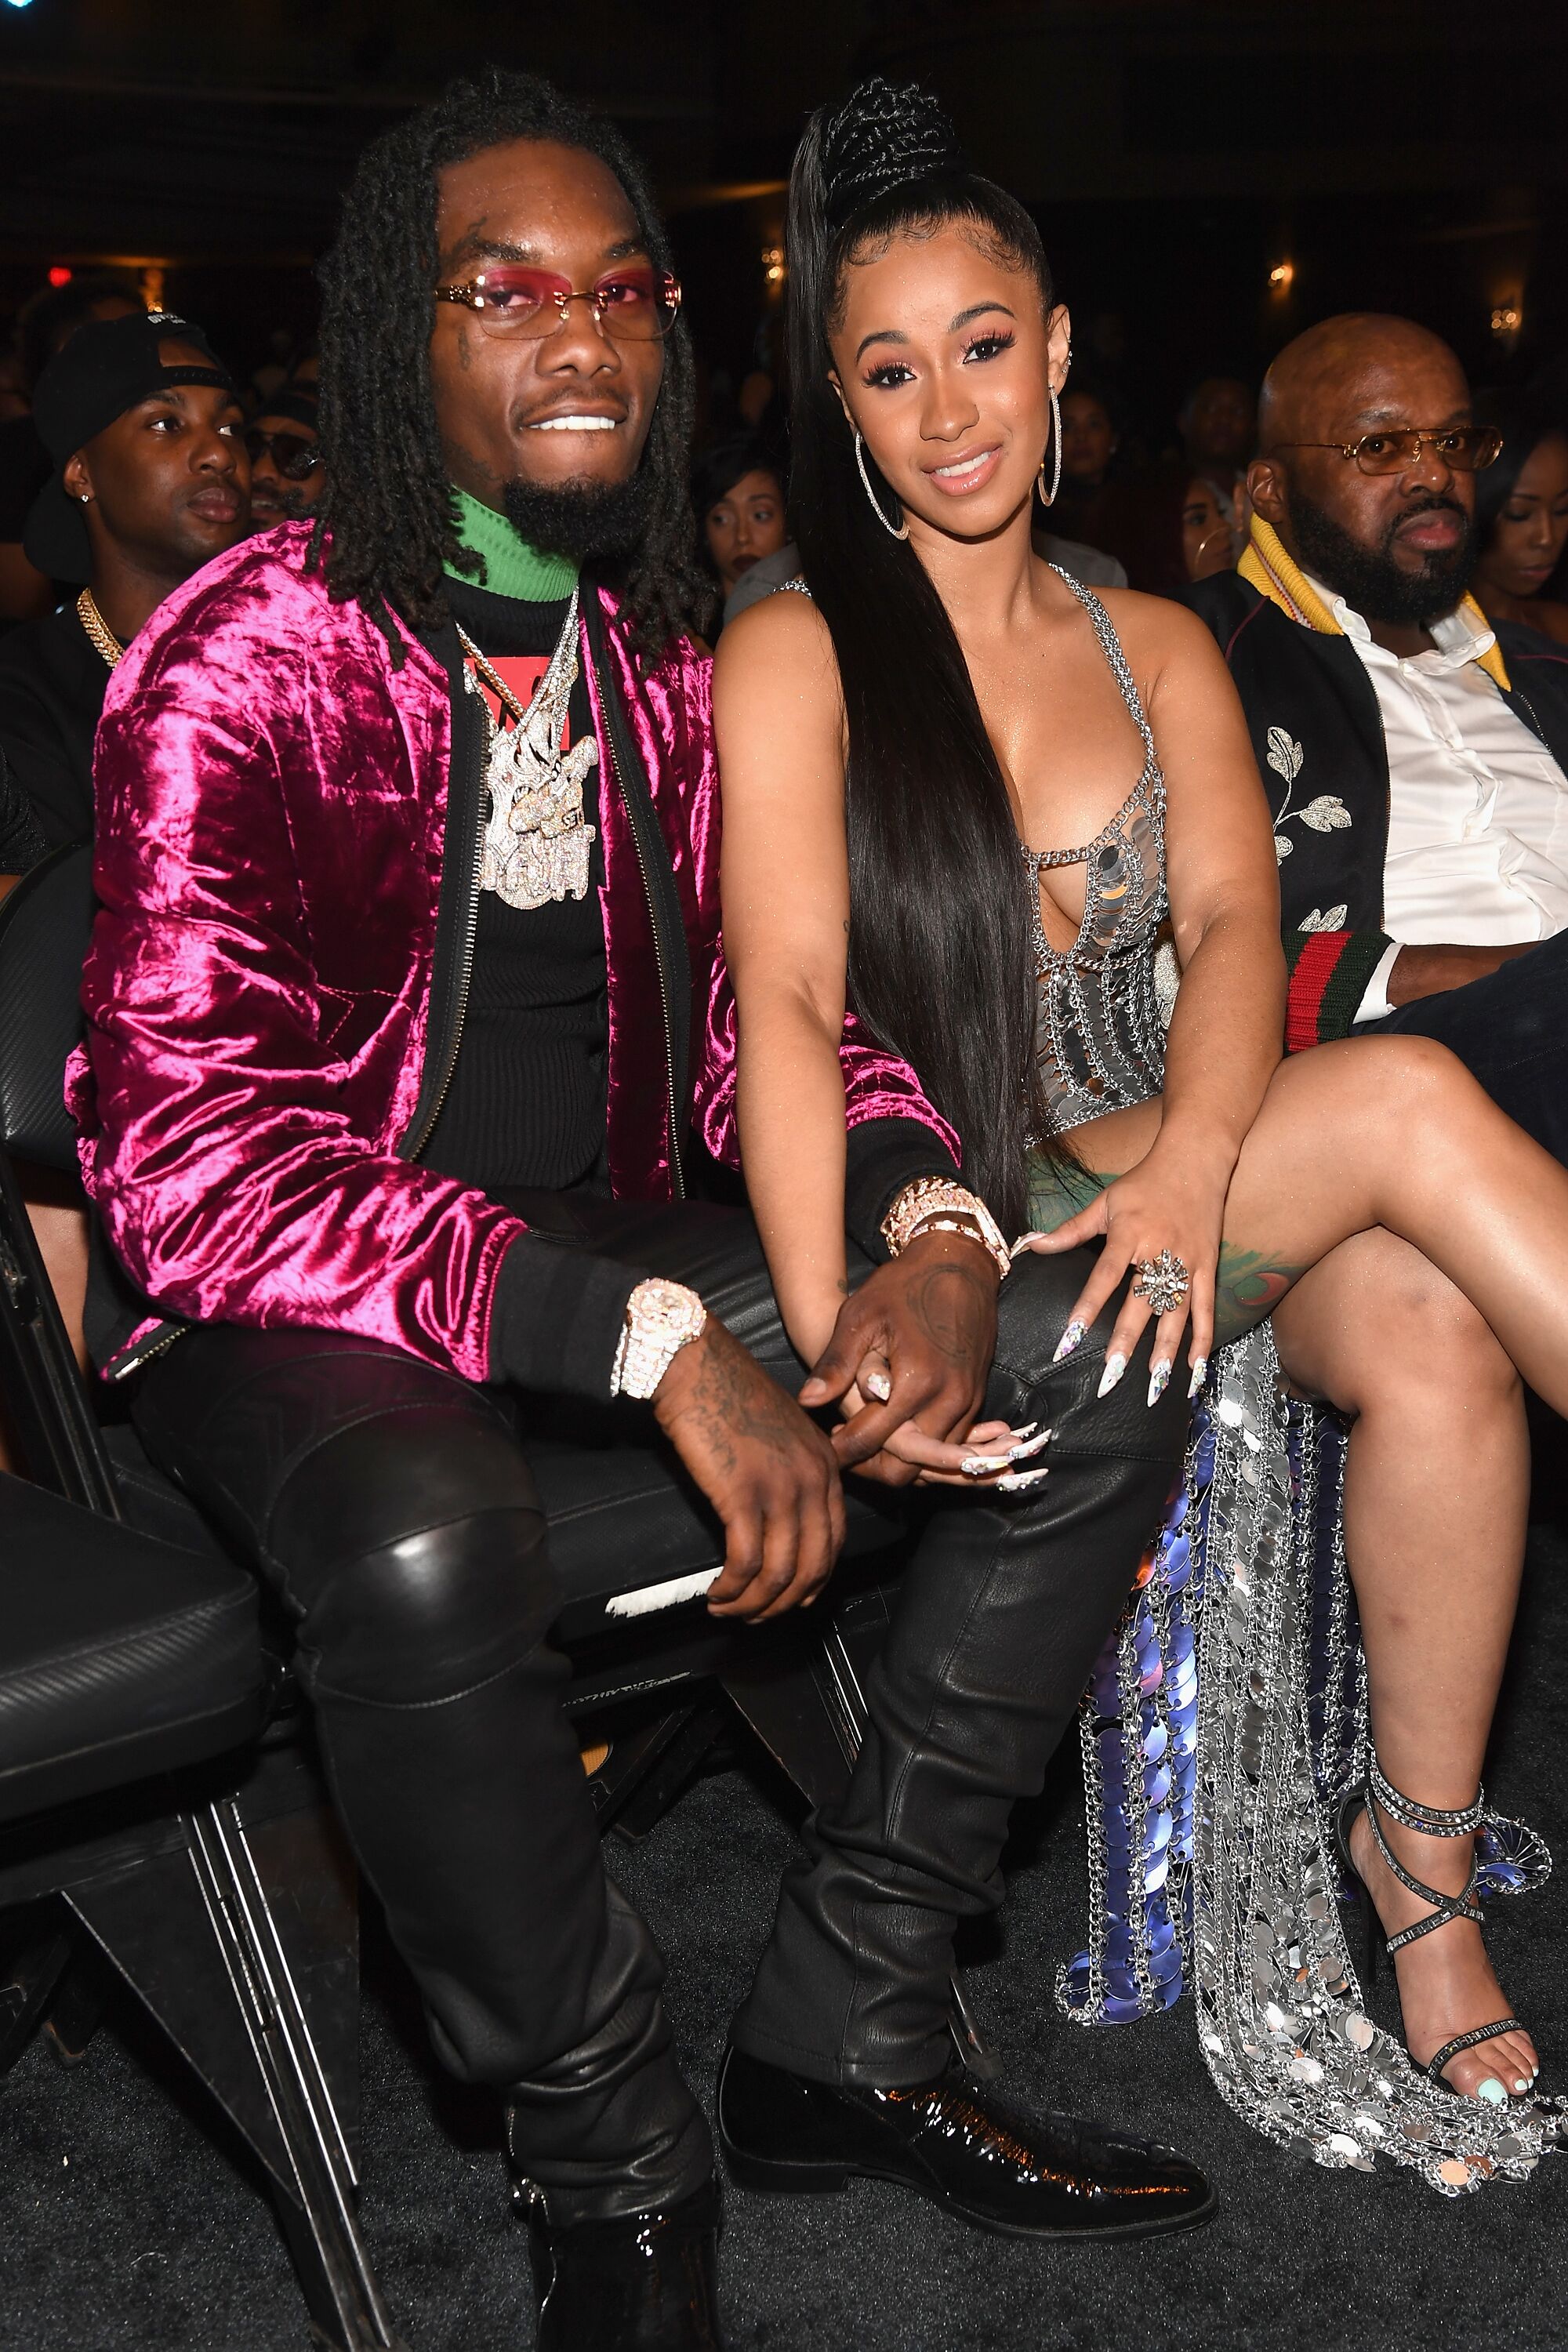 Cardi and Offset in matching sequined outfits during an awards night | Source: Getty Images/GlobalImagesUkraine